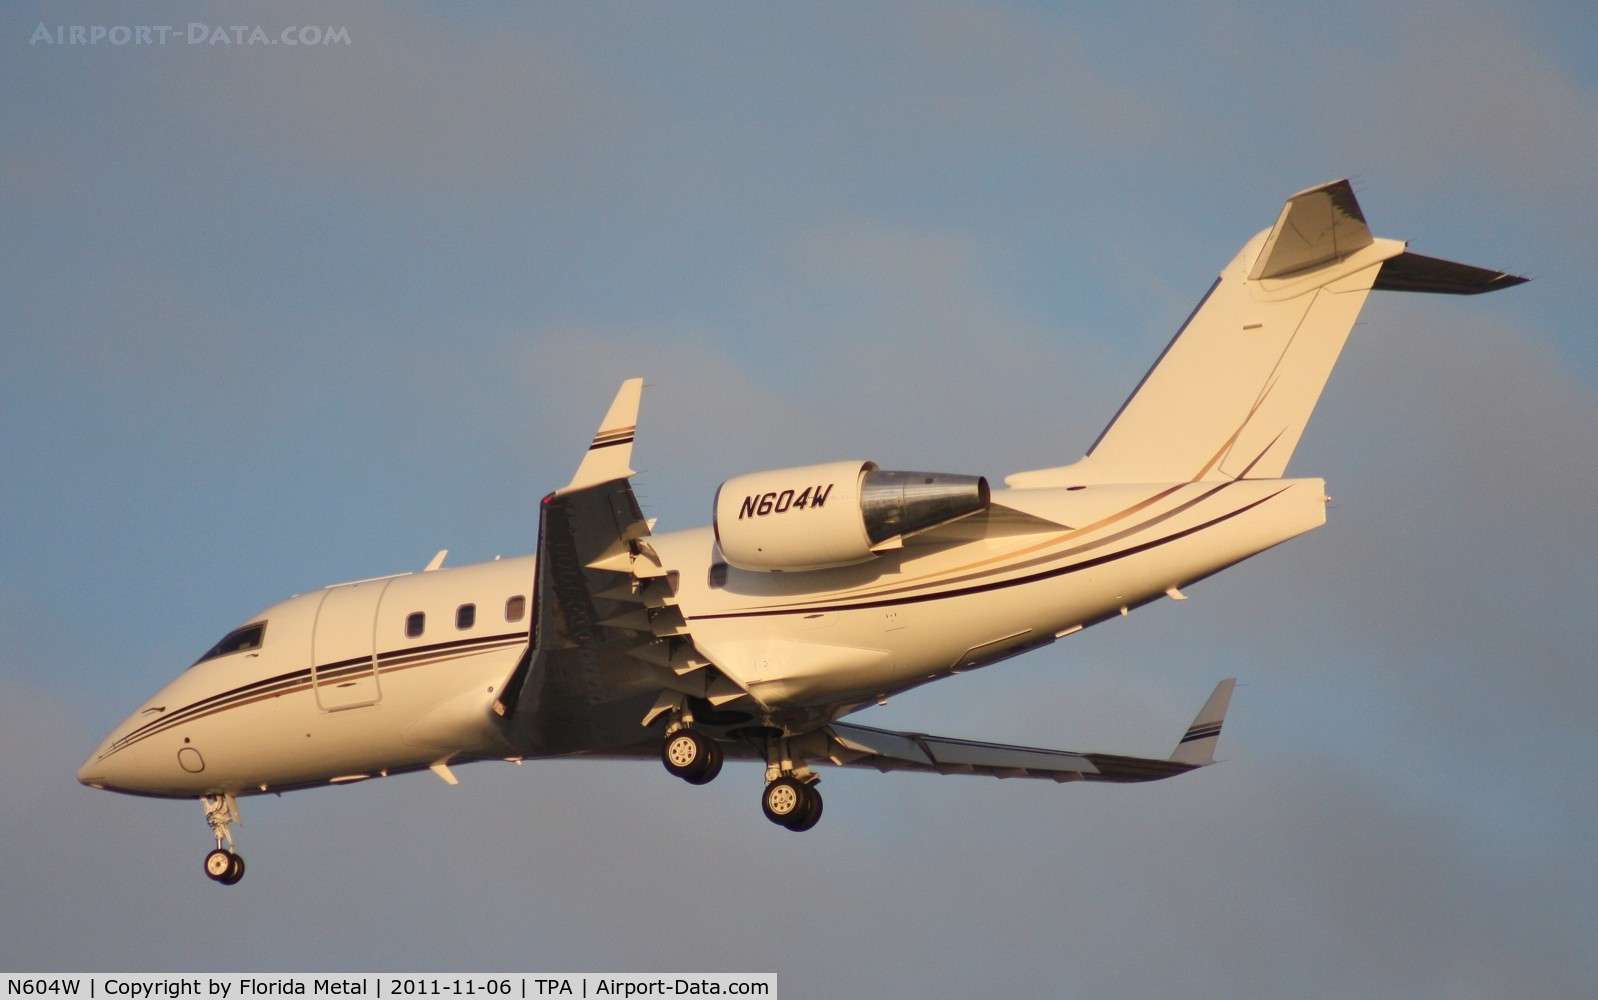 N604W, 1999 Bombardier Challenger 604 (CL-600-2B16) C/N 5421, Challenger 604